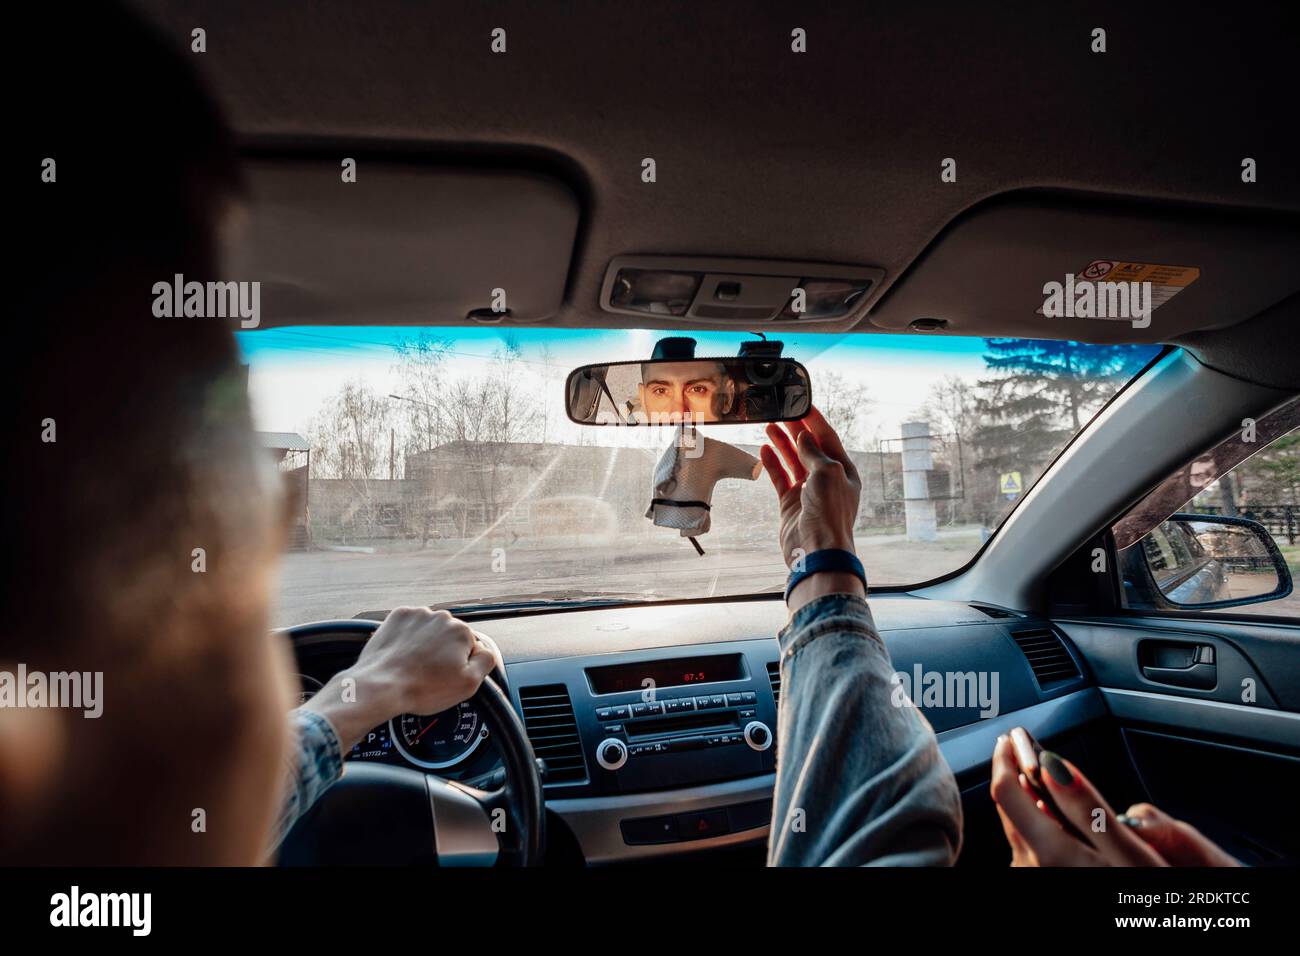 The young adventurer ensures a safe journey by adjusting the car's rearview mirror, covering the topic of travel and exploration Stock Photo